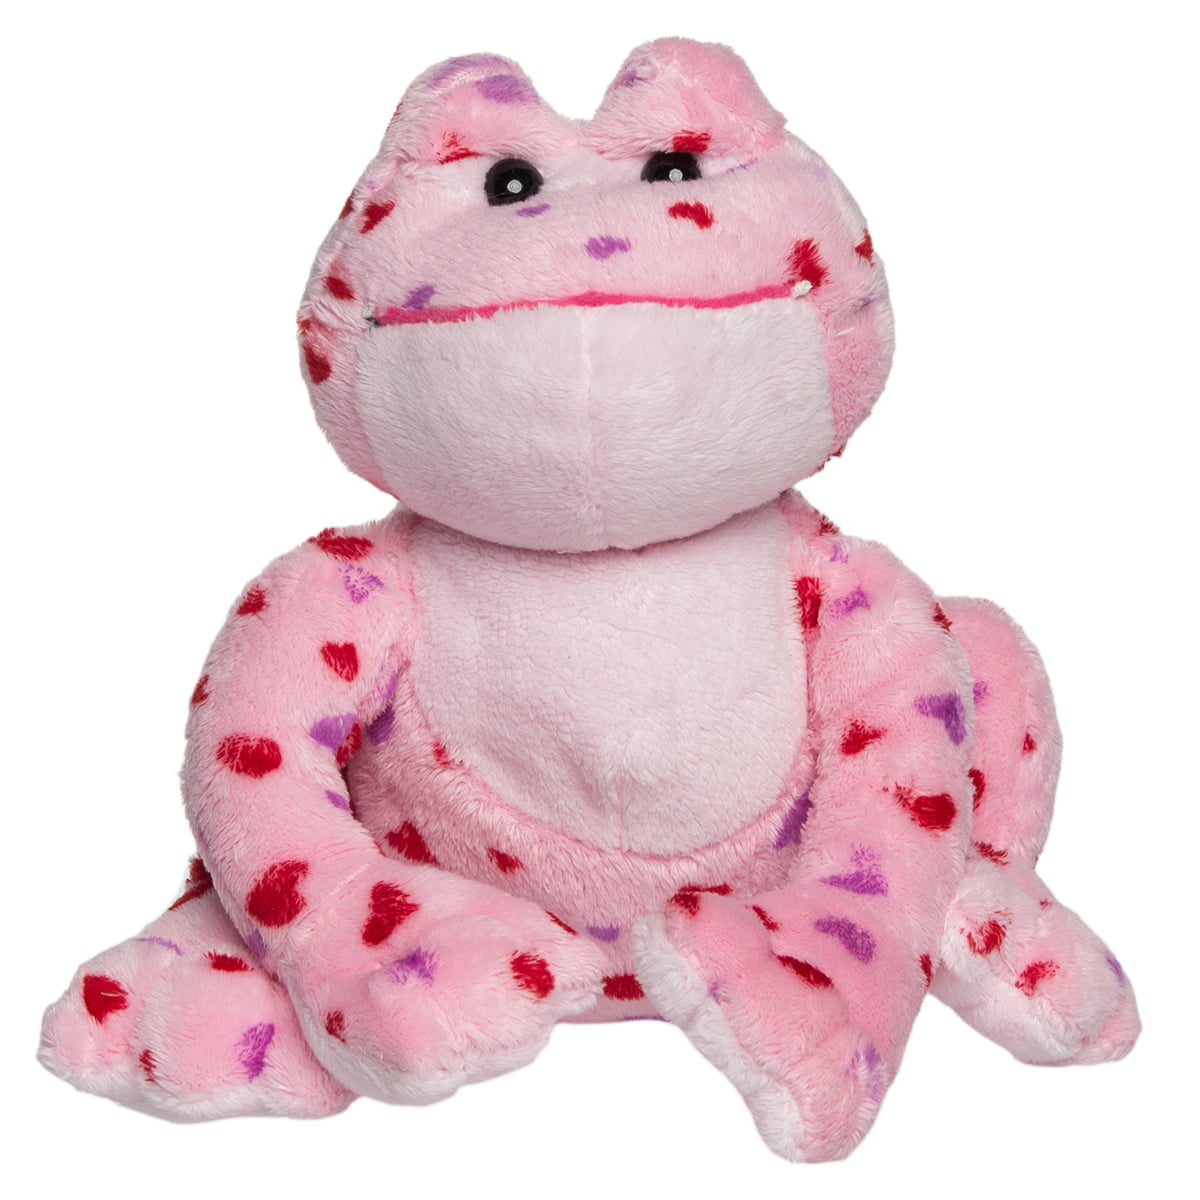 Webkinz pink Valentine's Love Frog Limited Edition NEW hearts seasonal limited 